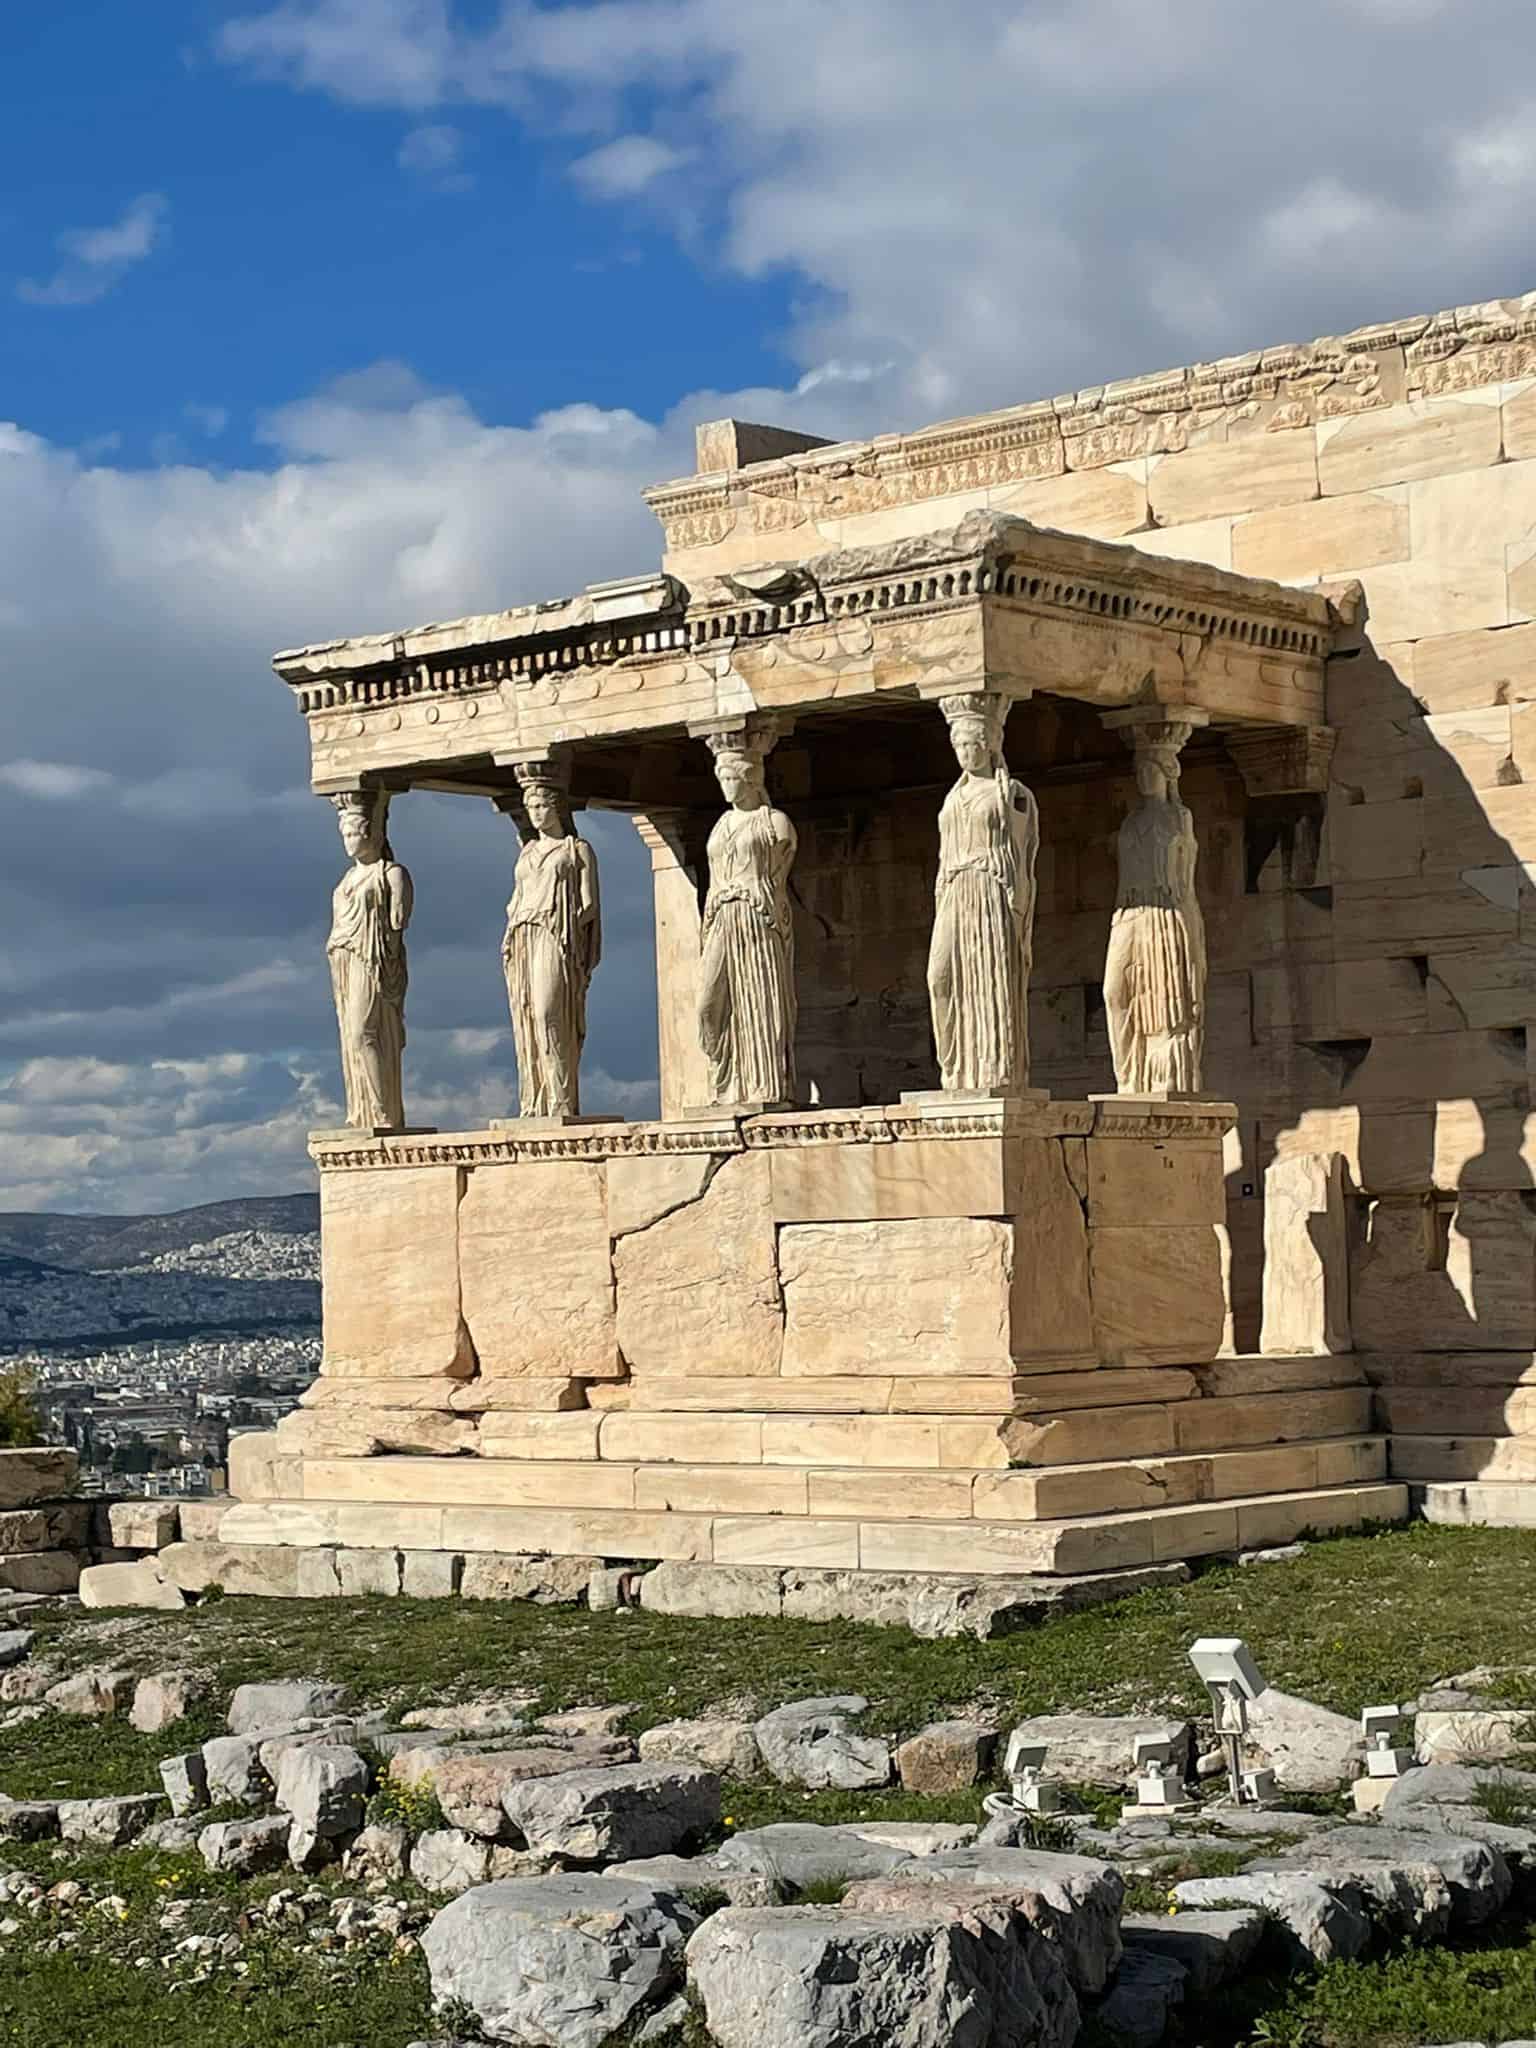 The Erechtheion at the Acropolis in Athens